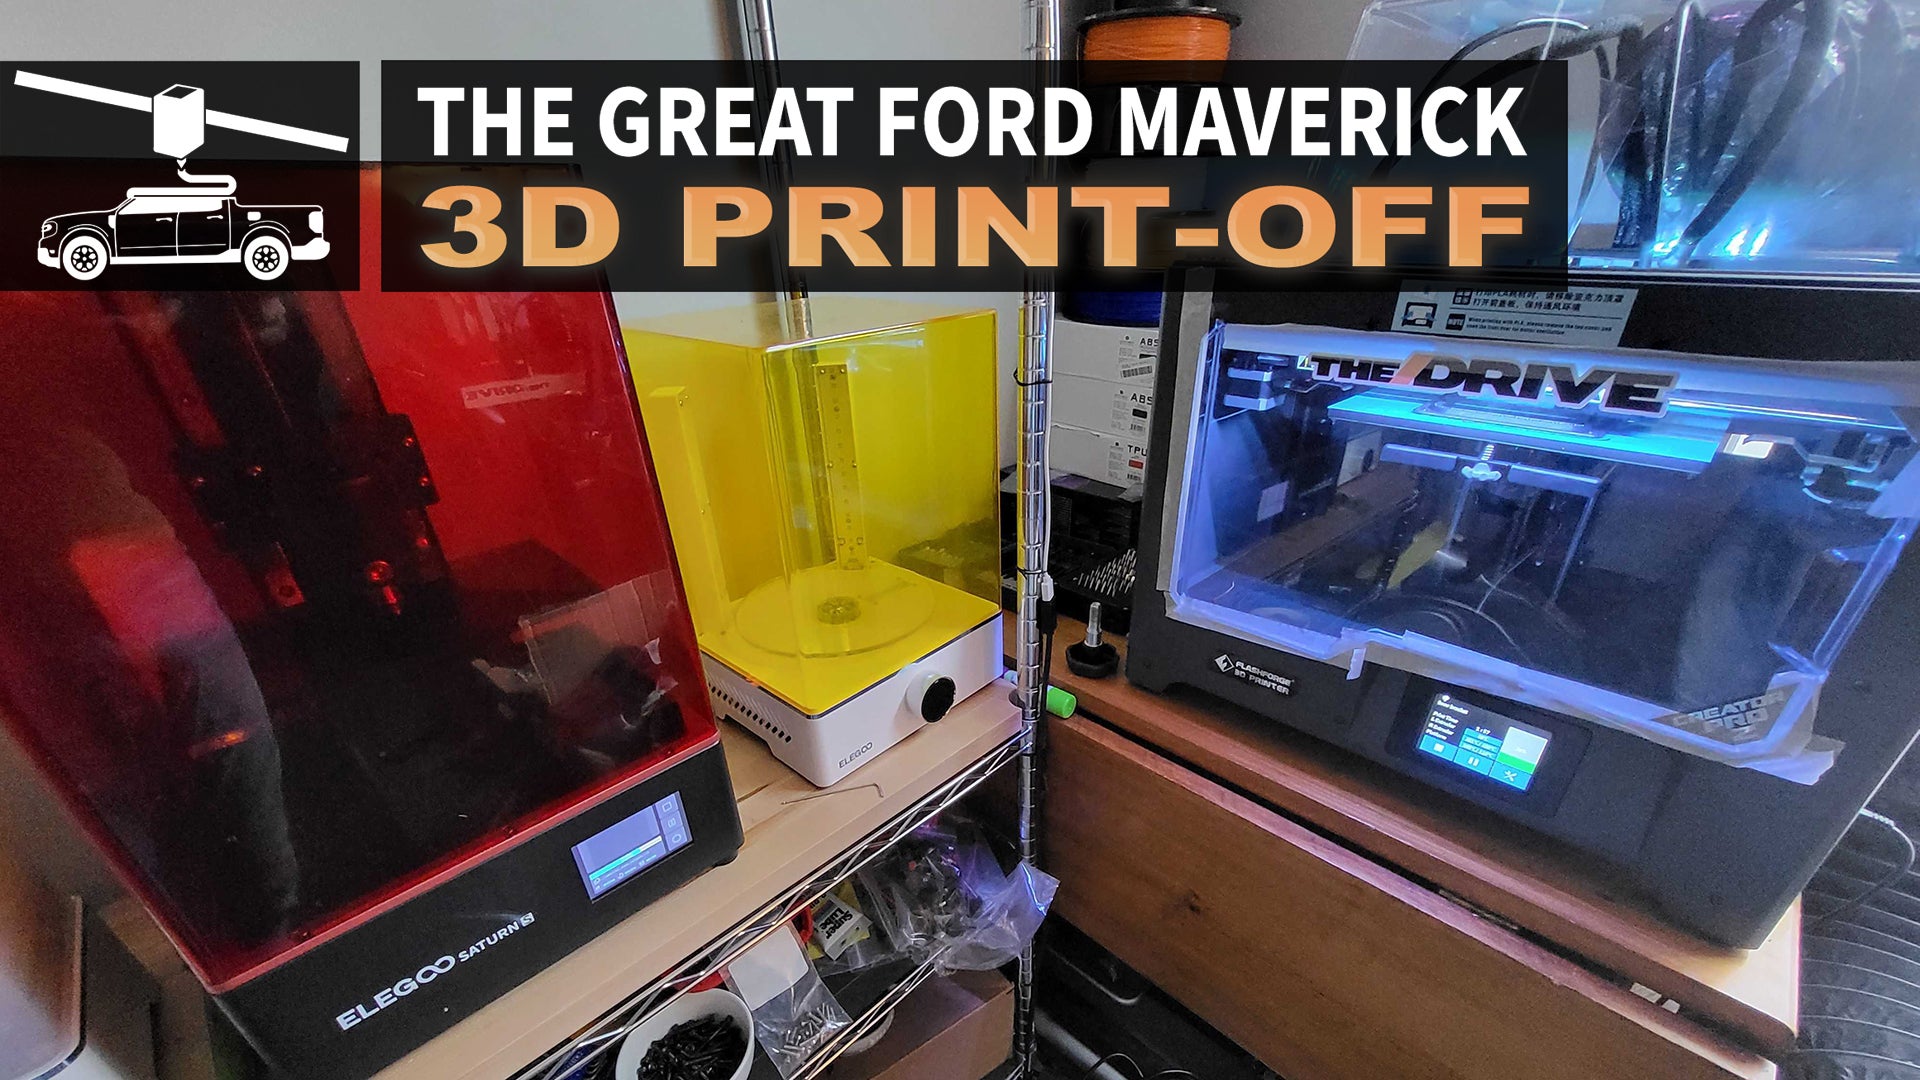 Here’s How to Get Started 3D Printing Your Own Car Accessories